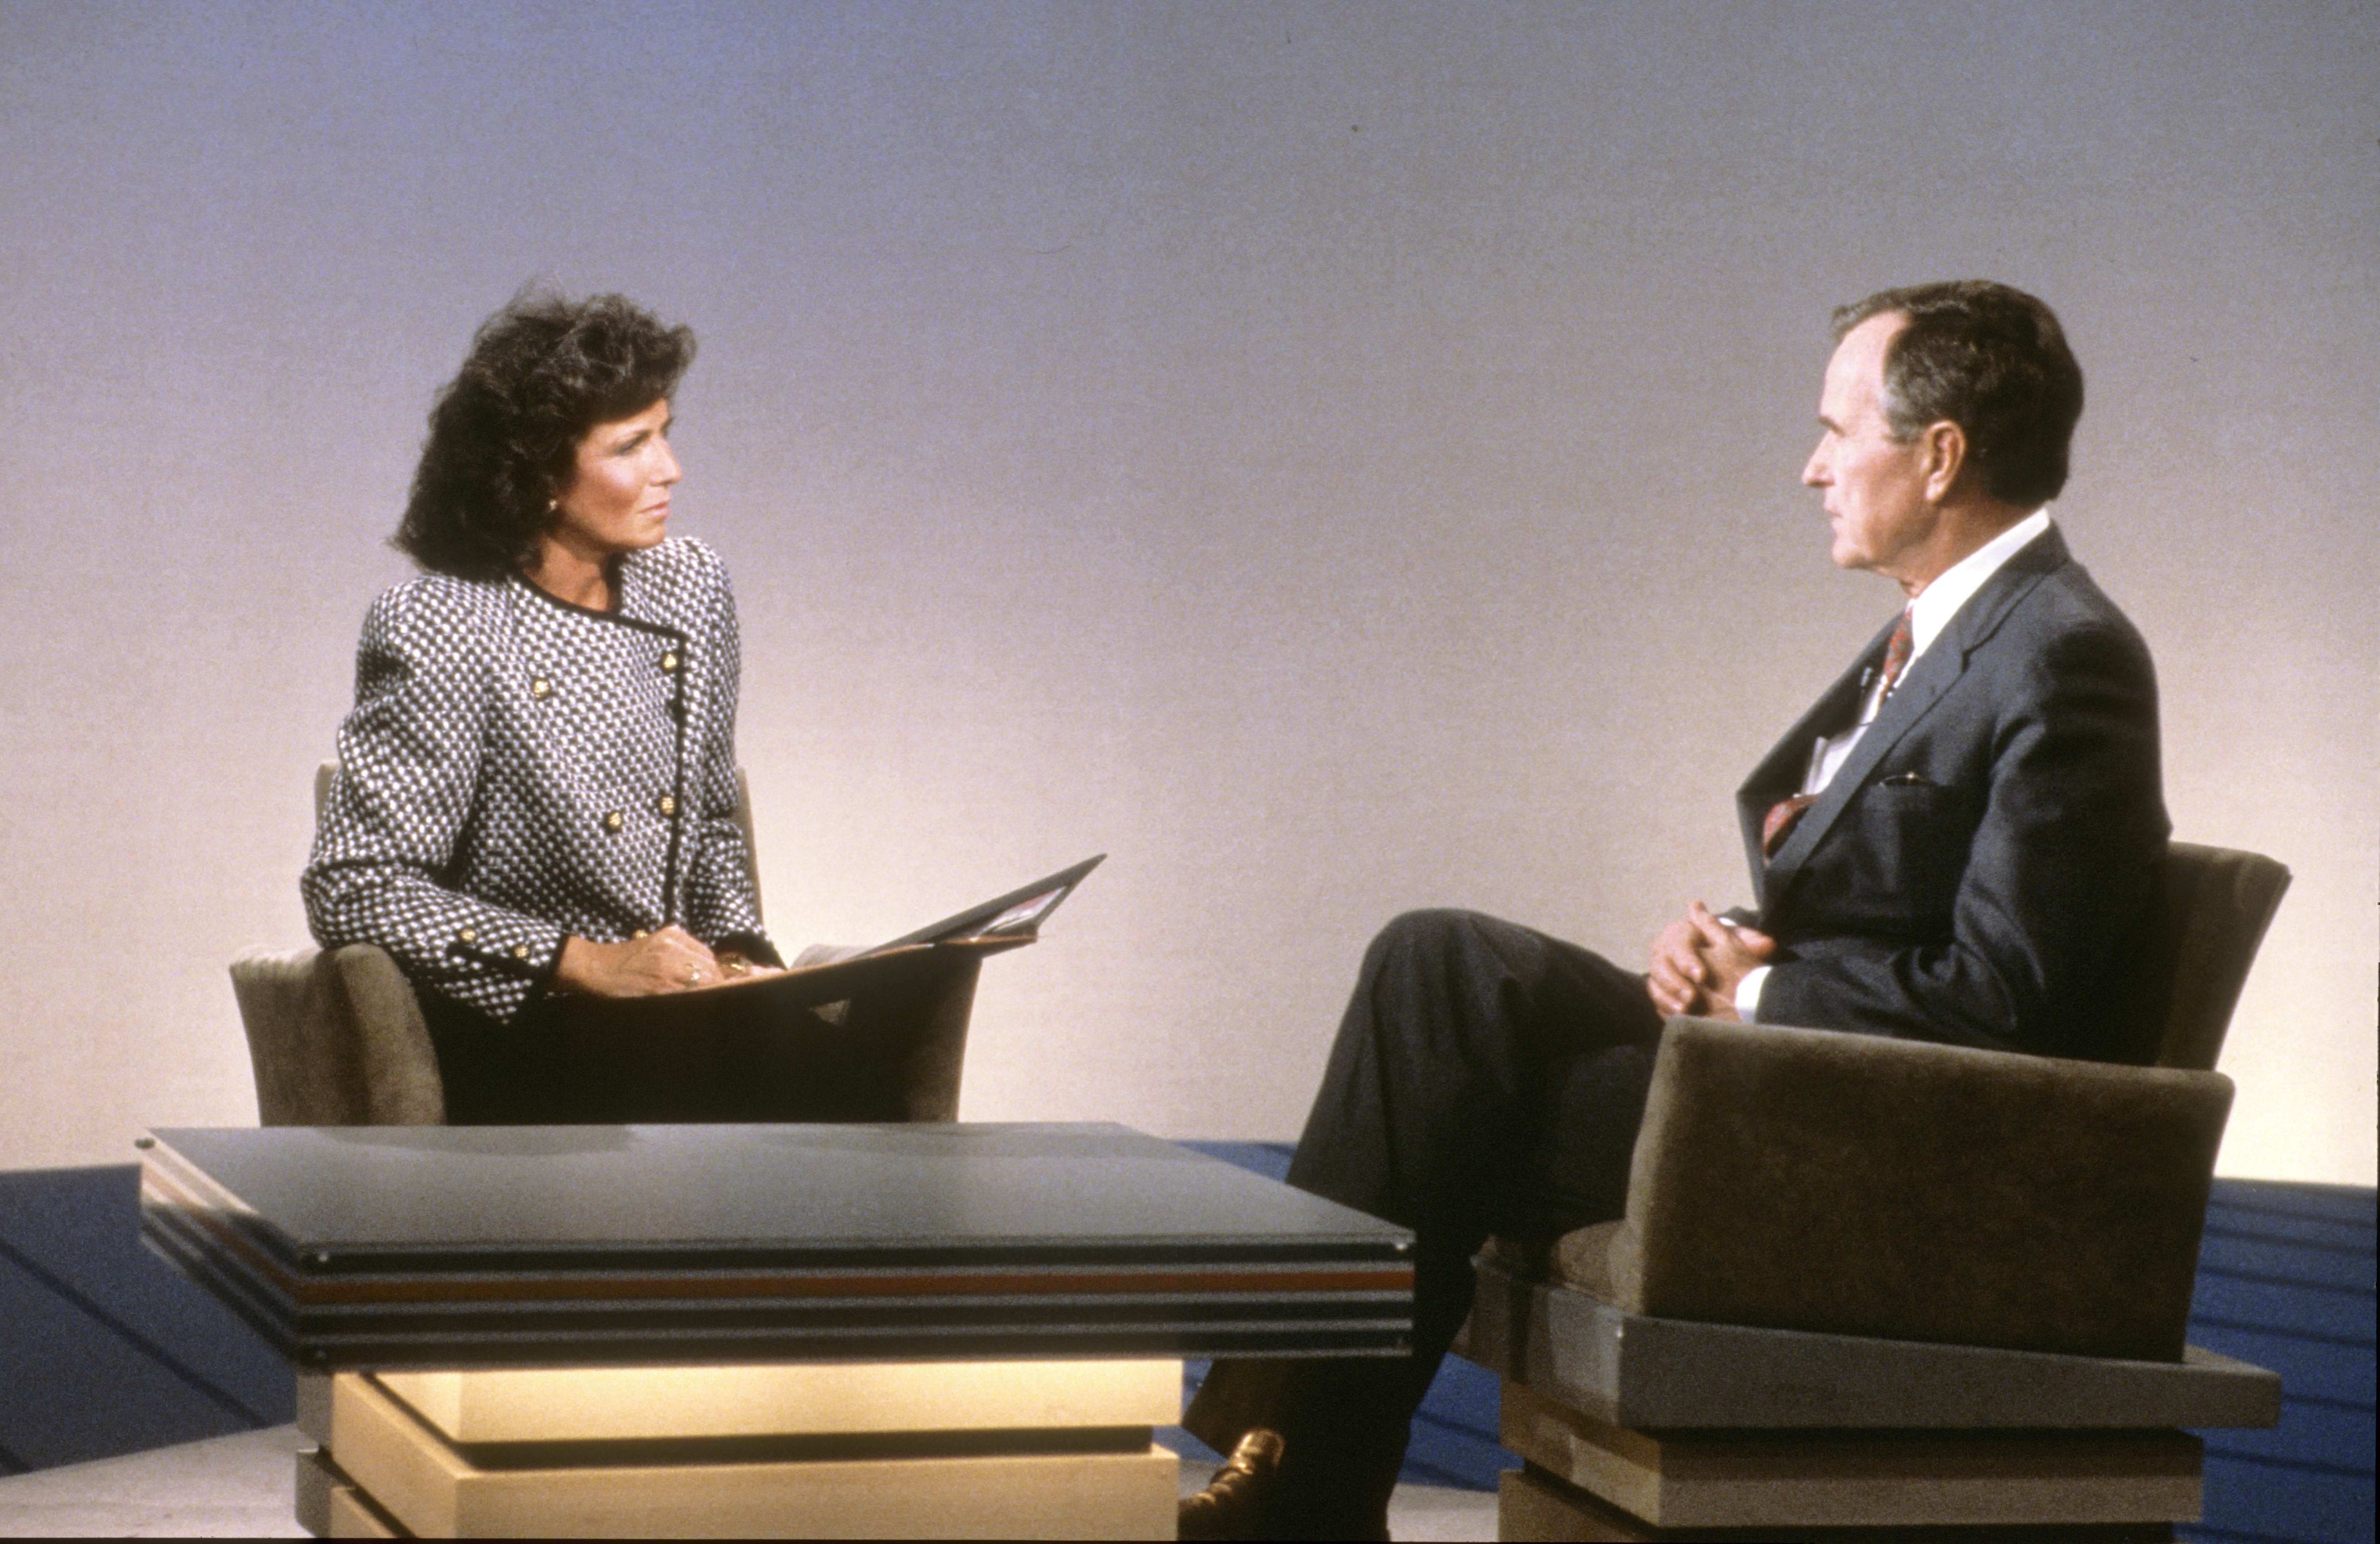 Nation’s Business Today host Meryl Comer on the set with former President, then Vice President, George Bush (Courtesy Nation’s Business Today)